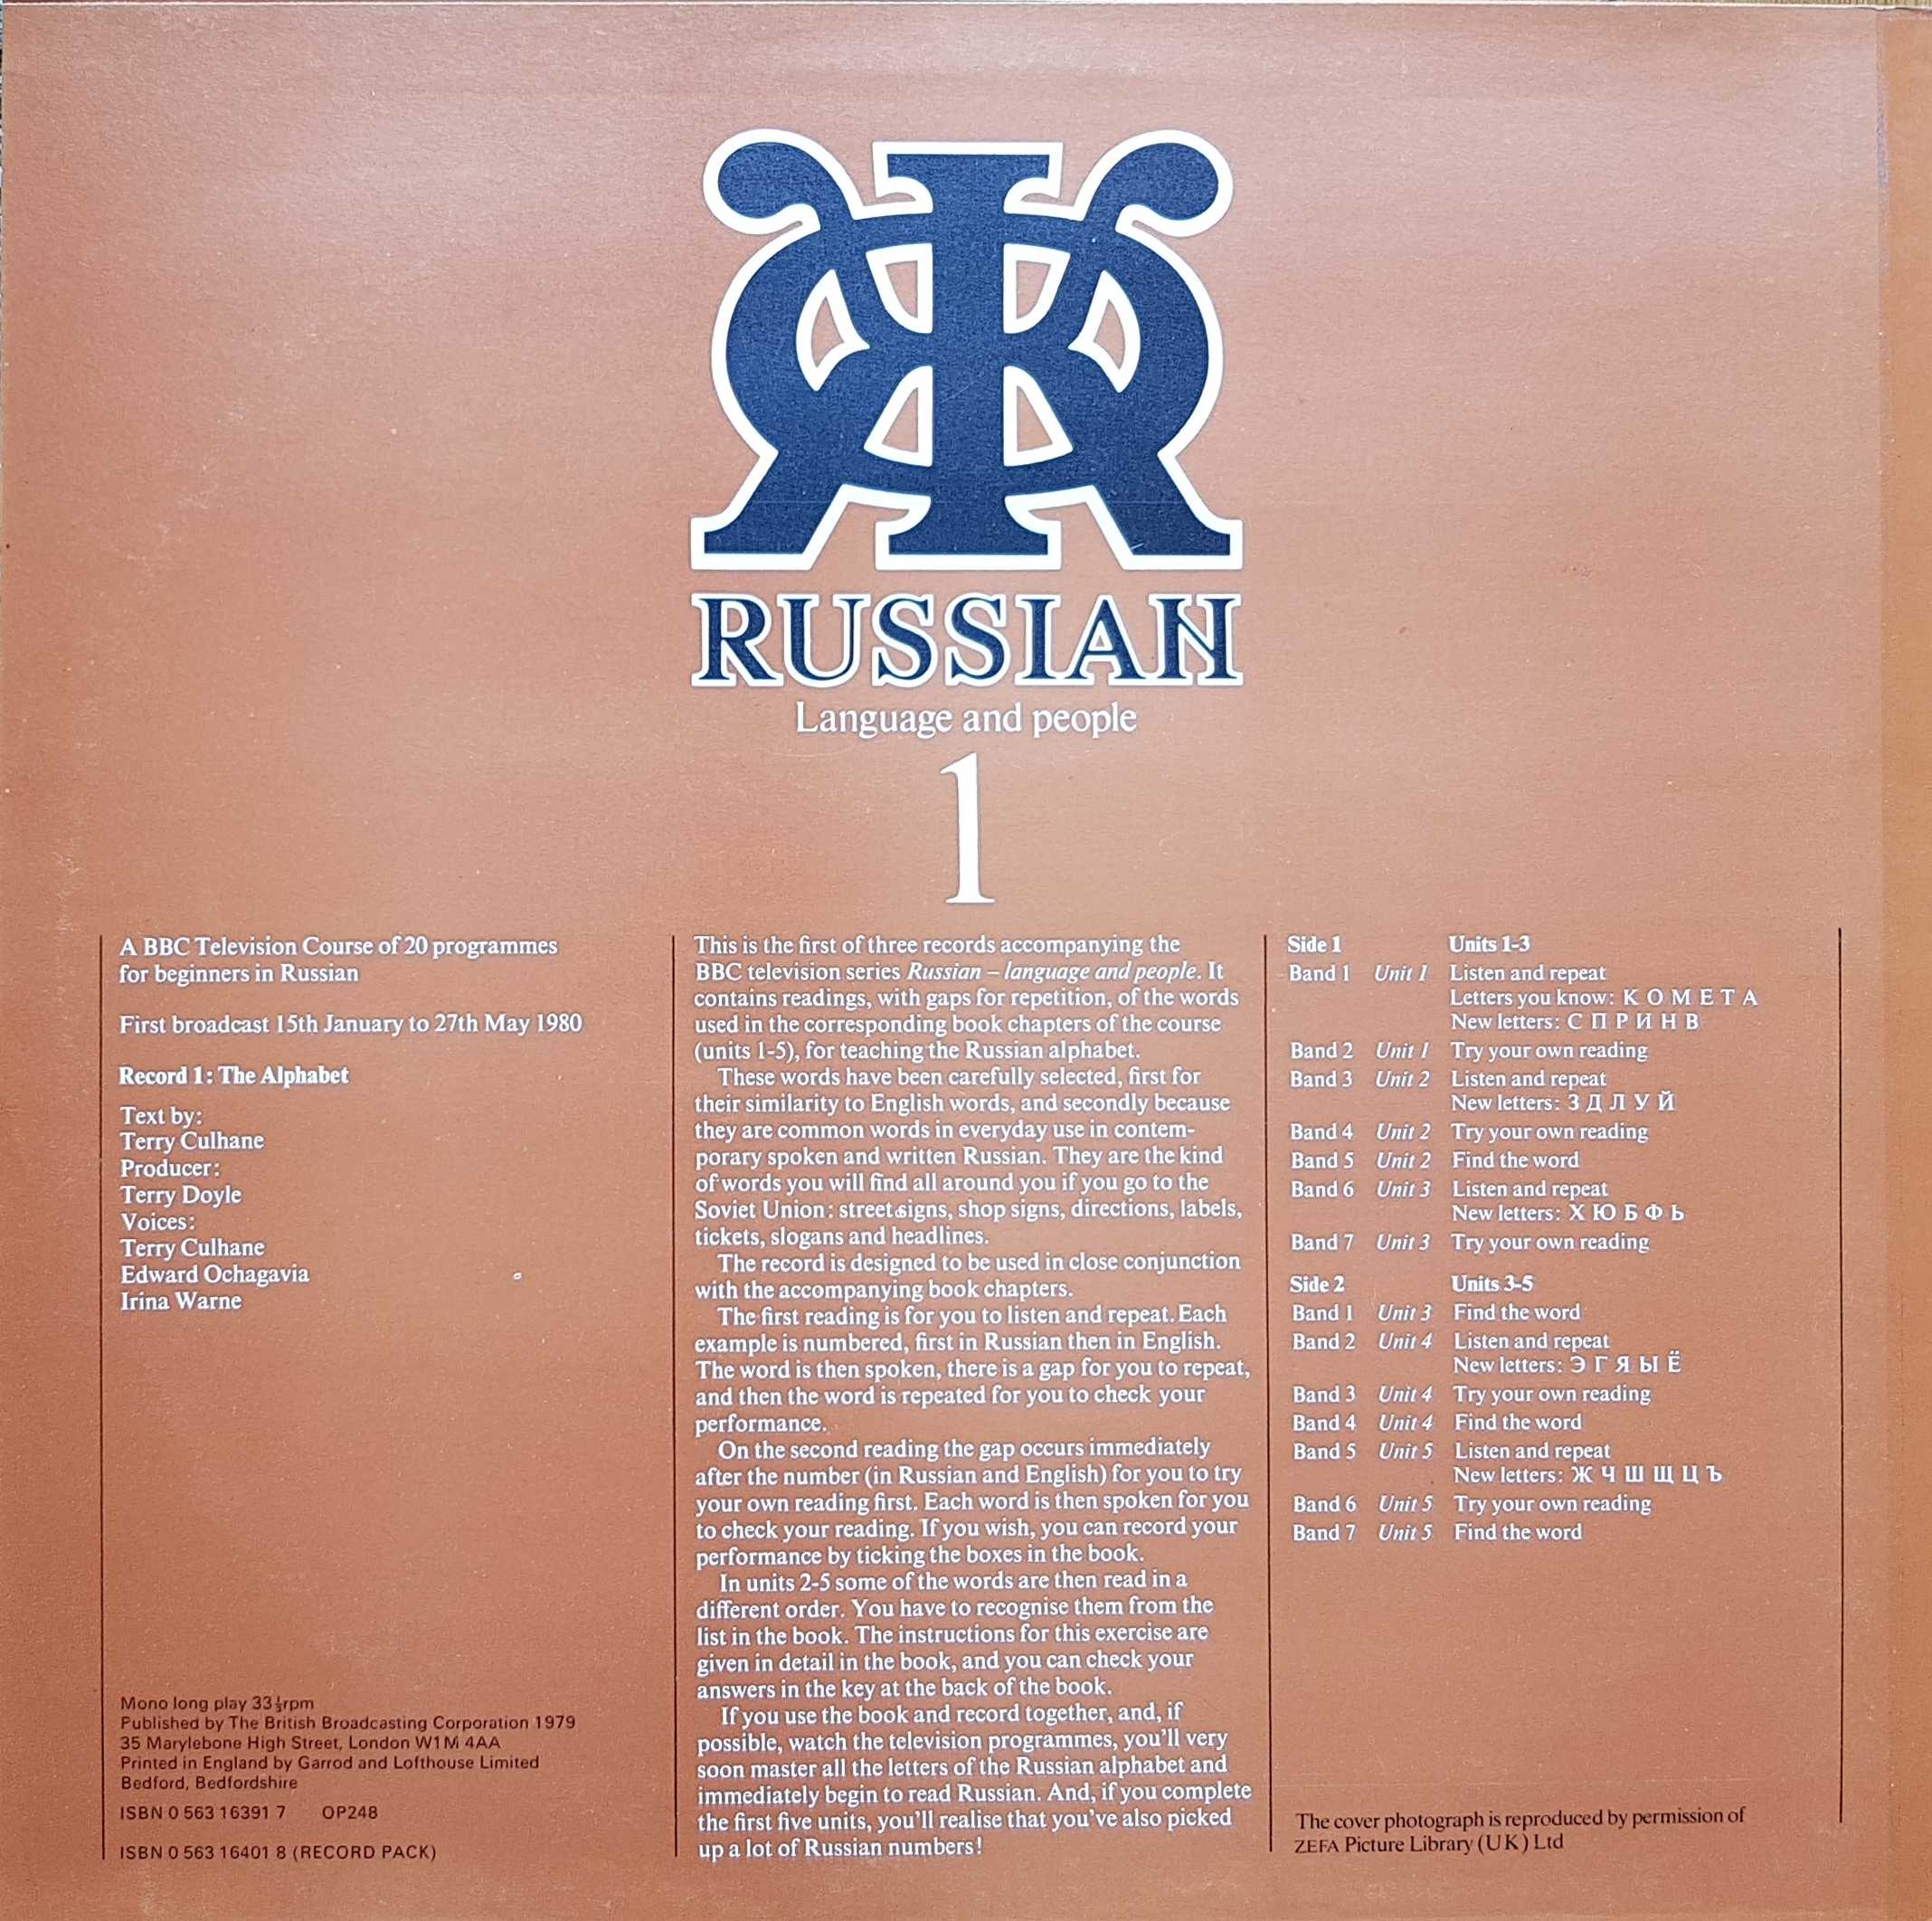 Picture of OP 248 Russian Language And People - Record 1 A self-instructional course for beginners in Russian by artist Terry Culhane from the BBC records and Tapes library